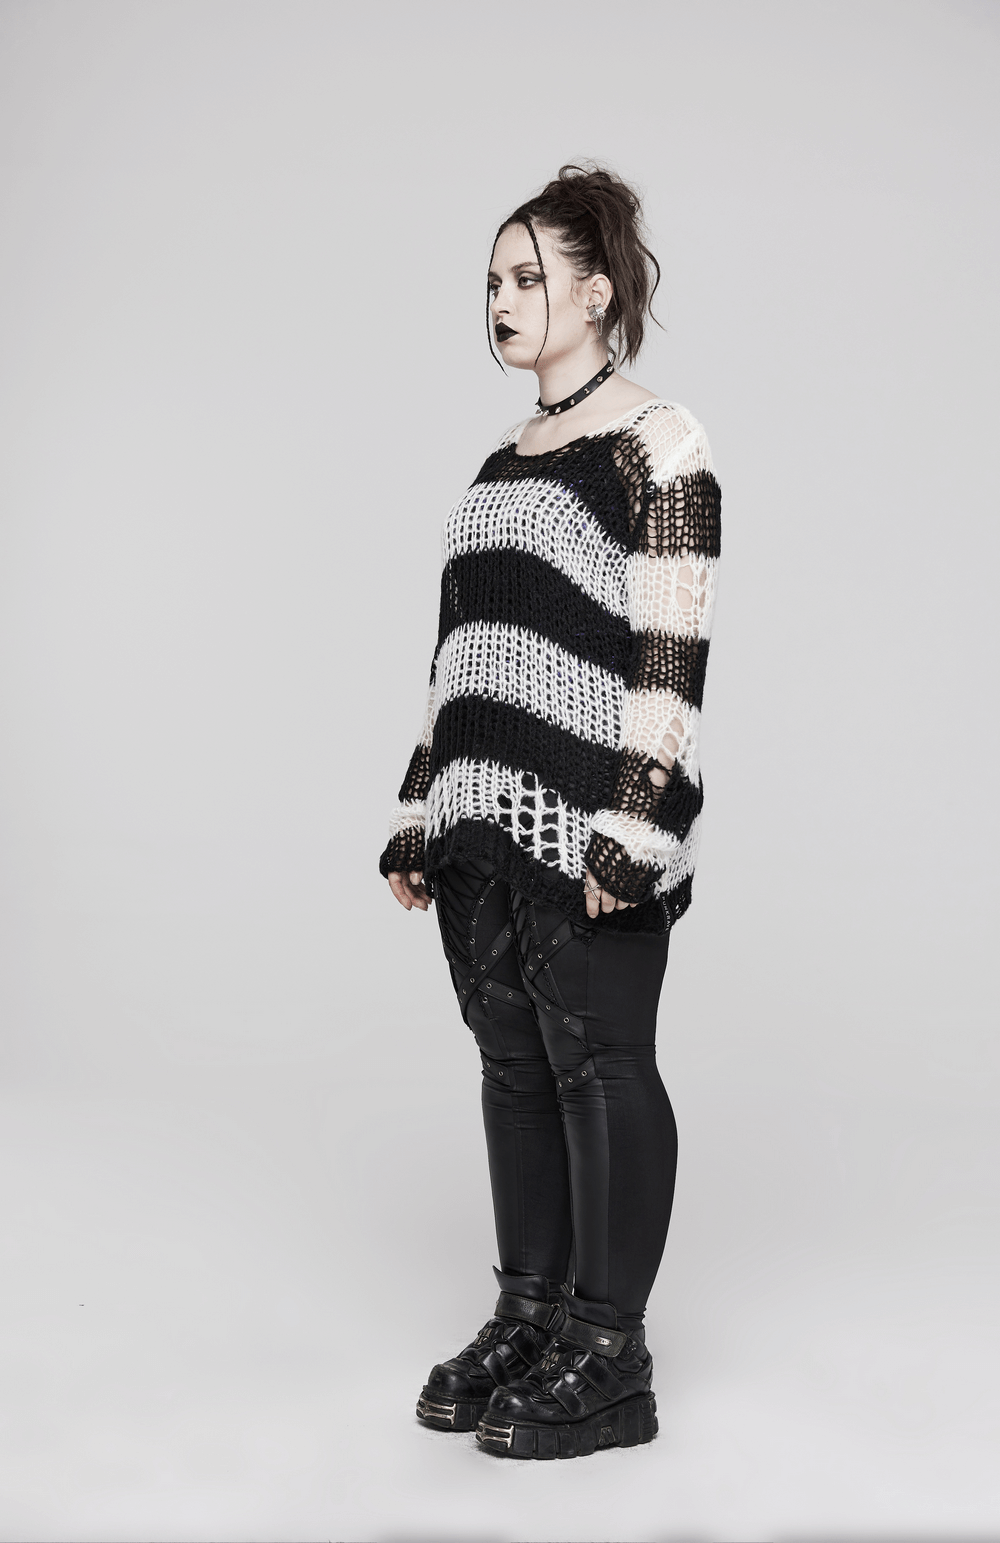 Stylish Mohair Striped Pullover with Irregular Holes